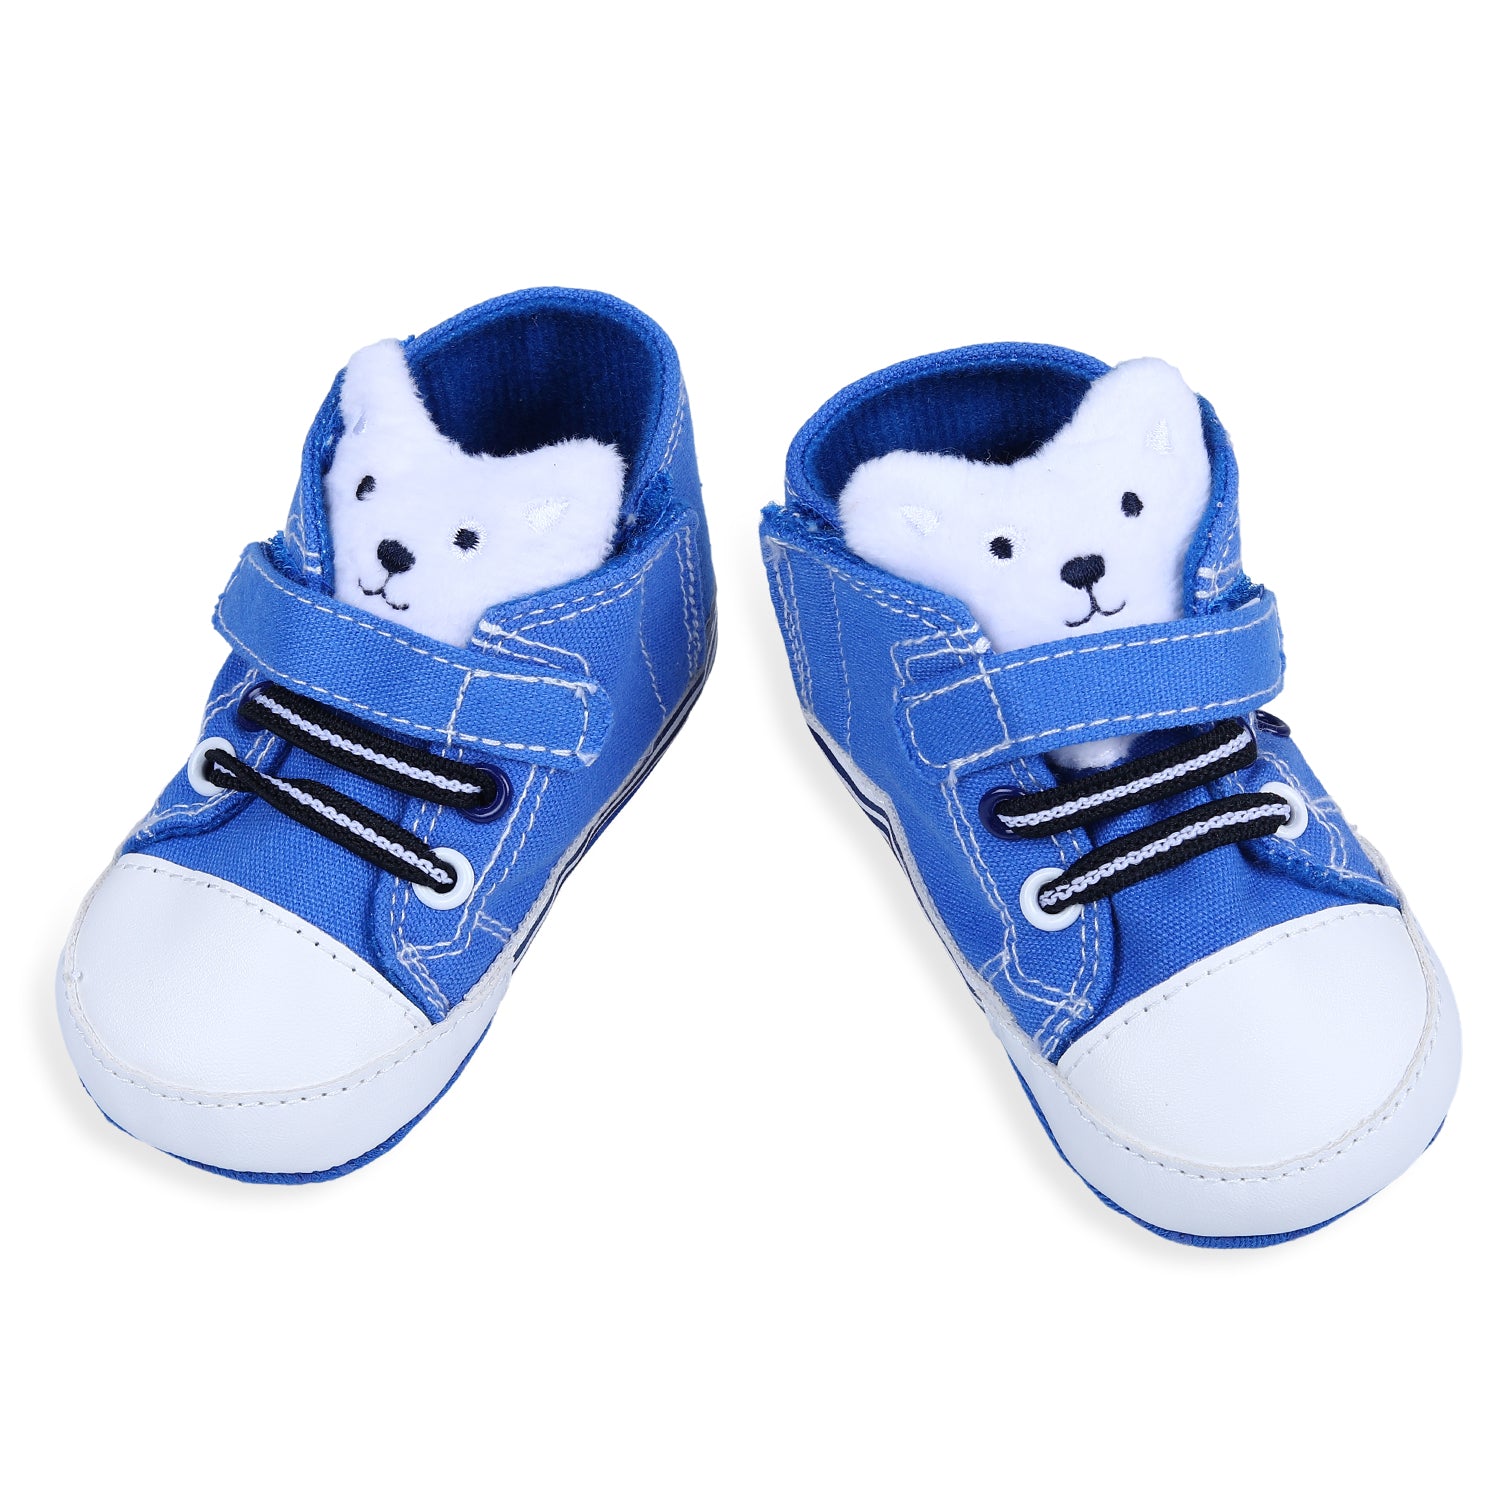 Baby Moo My Buddy Bear Cute And Stylish Comfy Velcro Booties - Blue